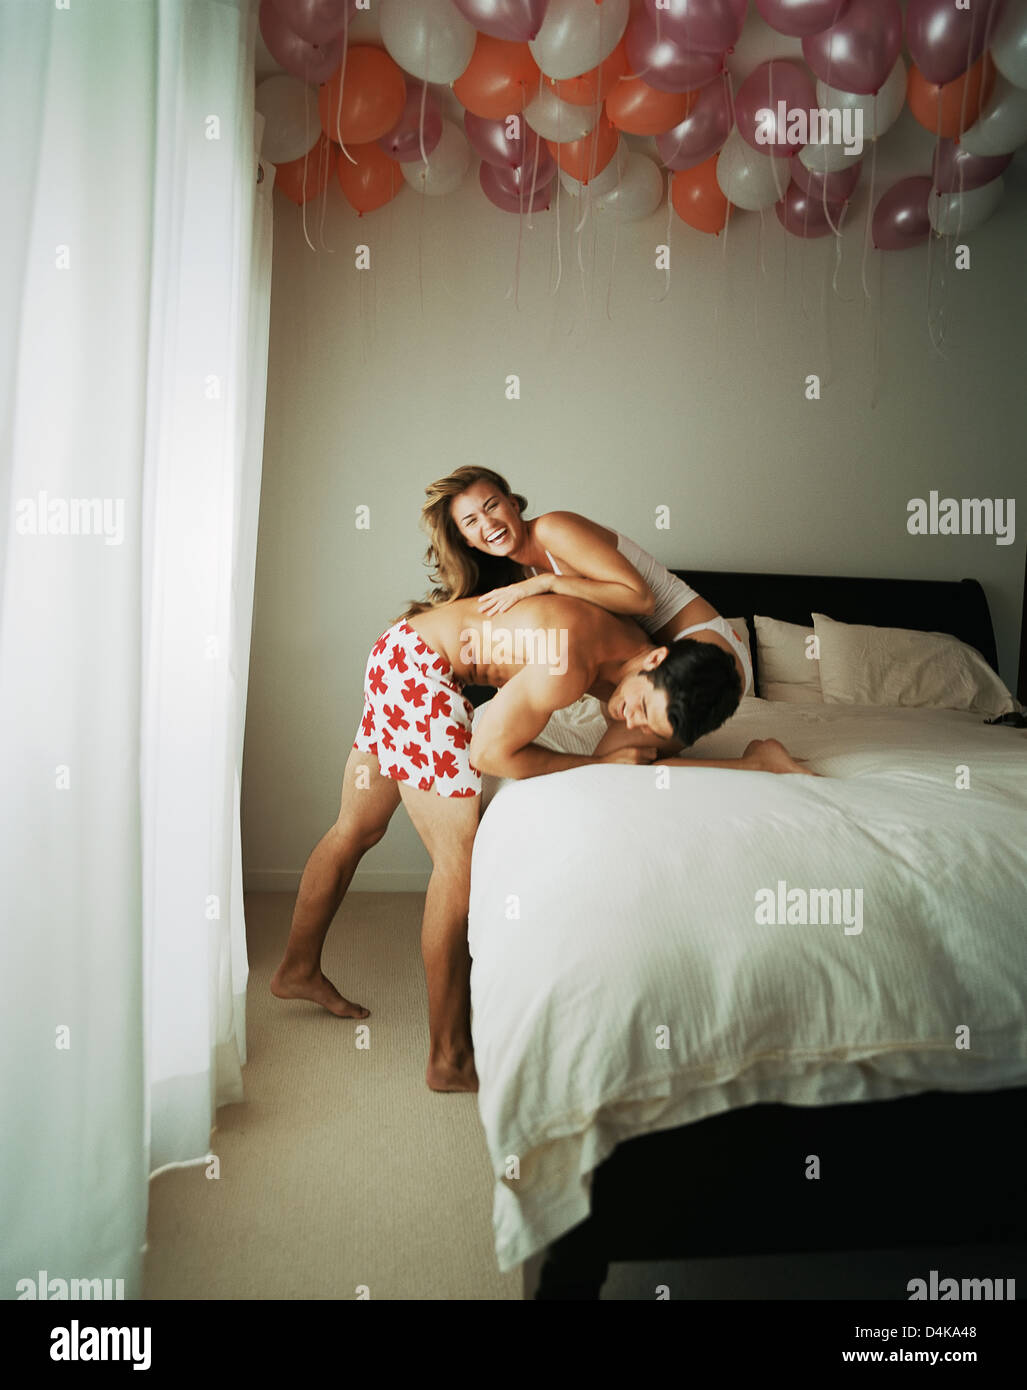 Smiling couple wrestling on bed Stock Photo